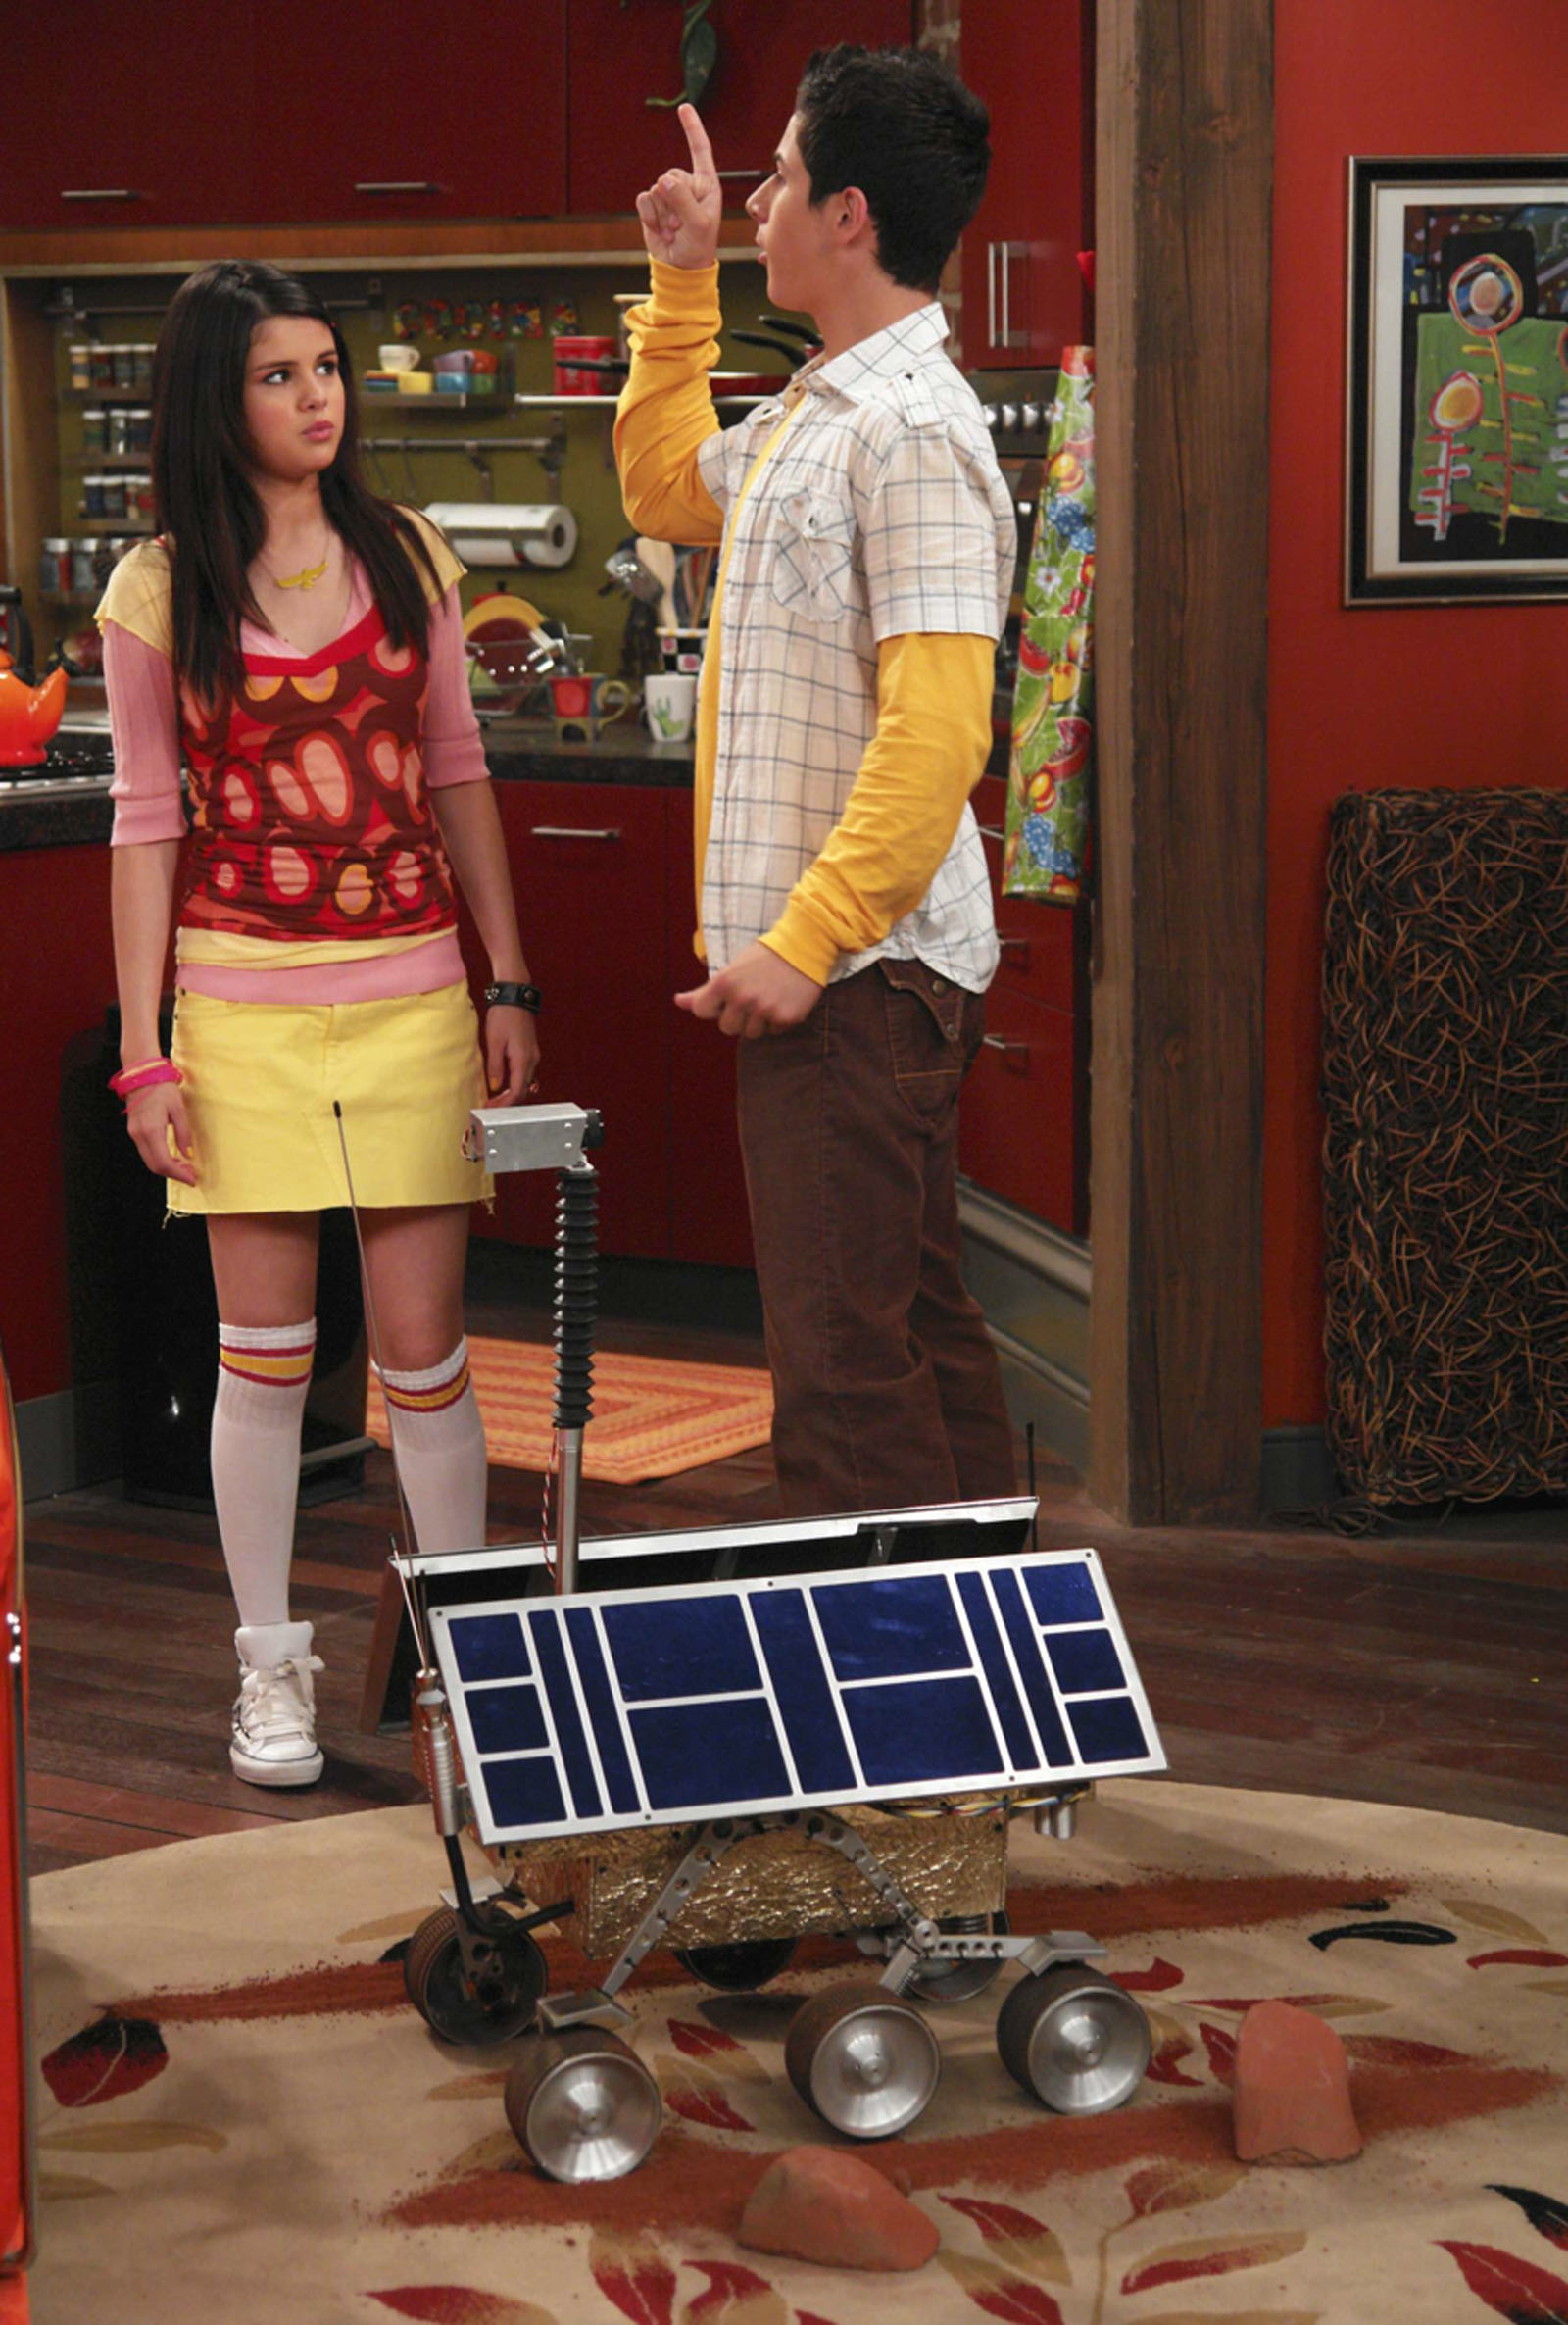 Selena Gomez has this one “Wizards of Waverly Place” prop framed